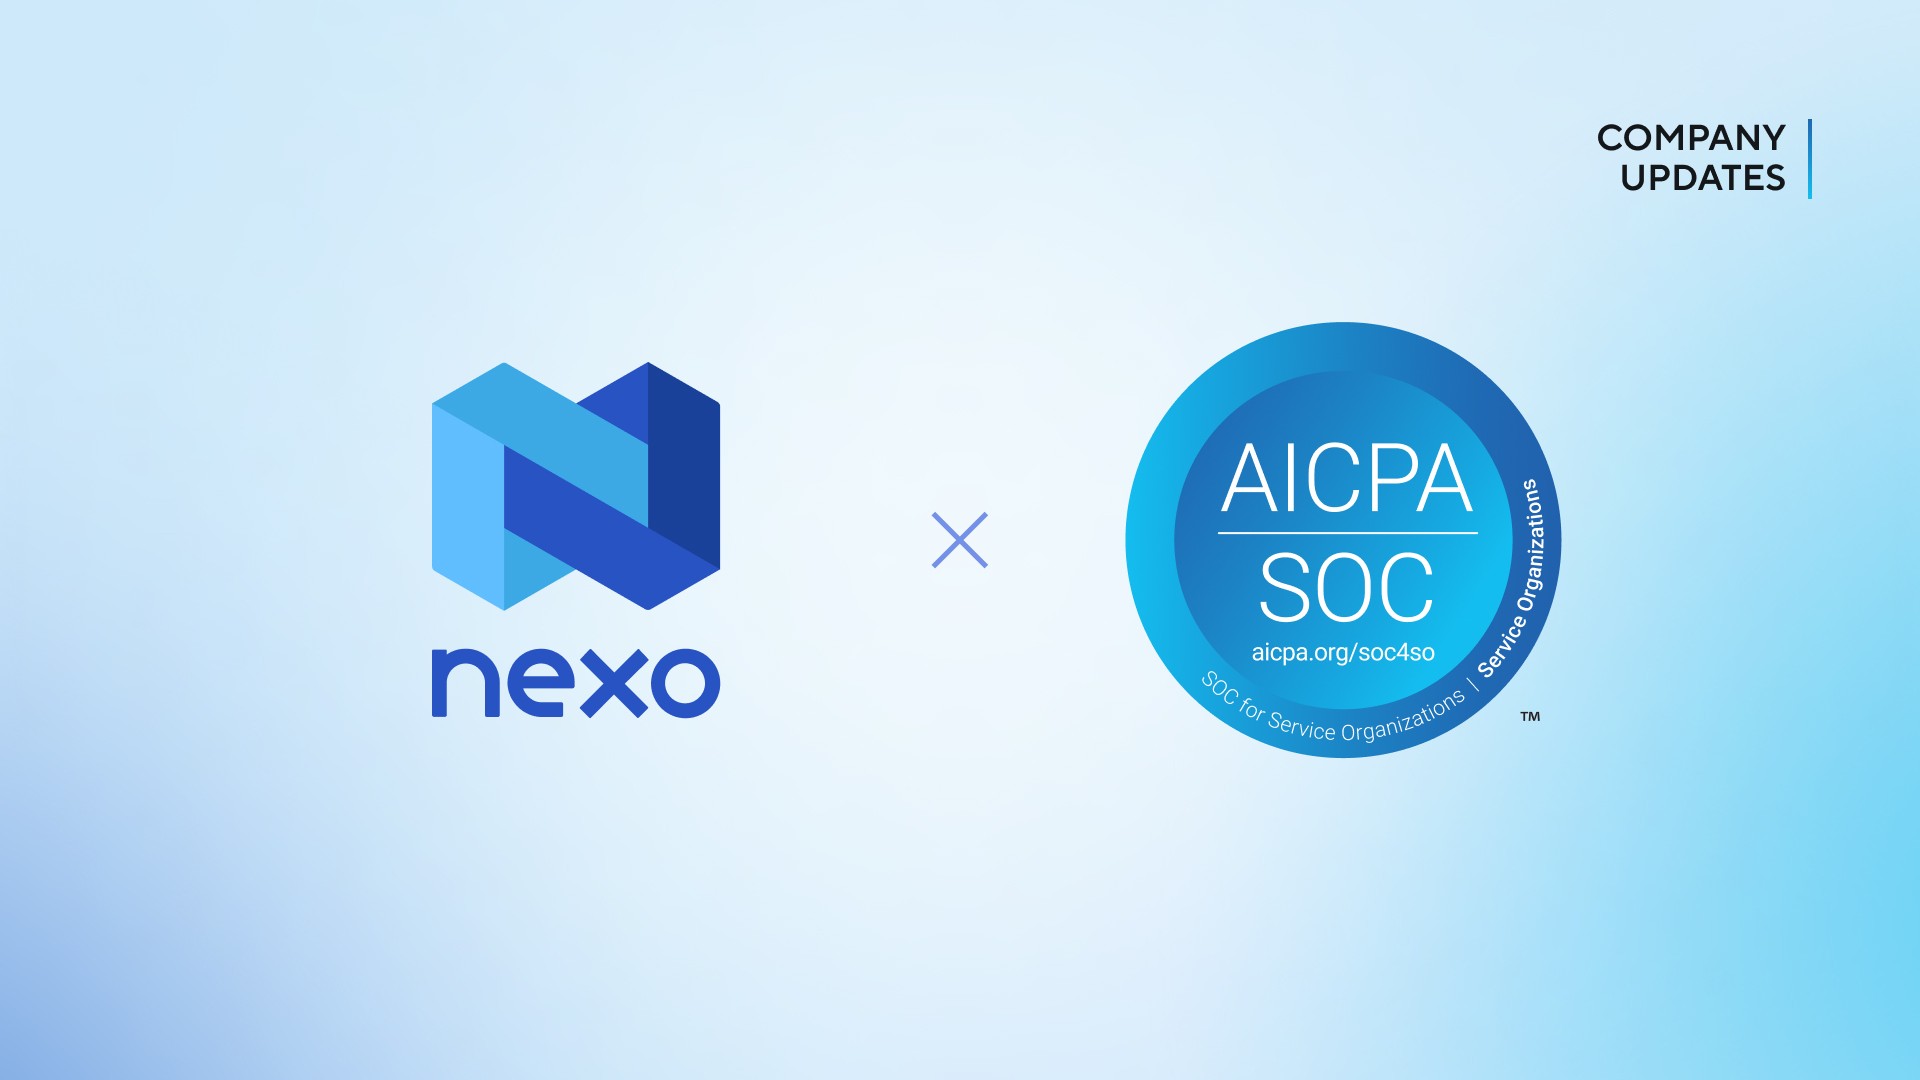 Nexo Strengthens Data Security with Successful SOC 2 Type 2 Assessment